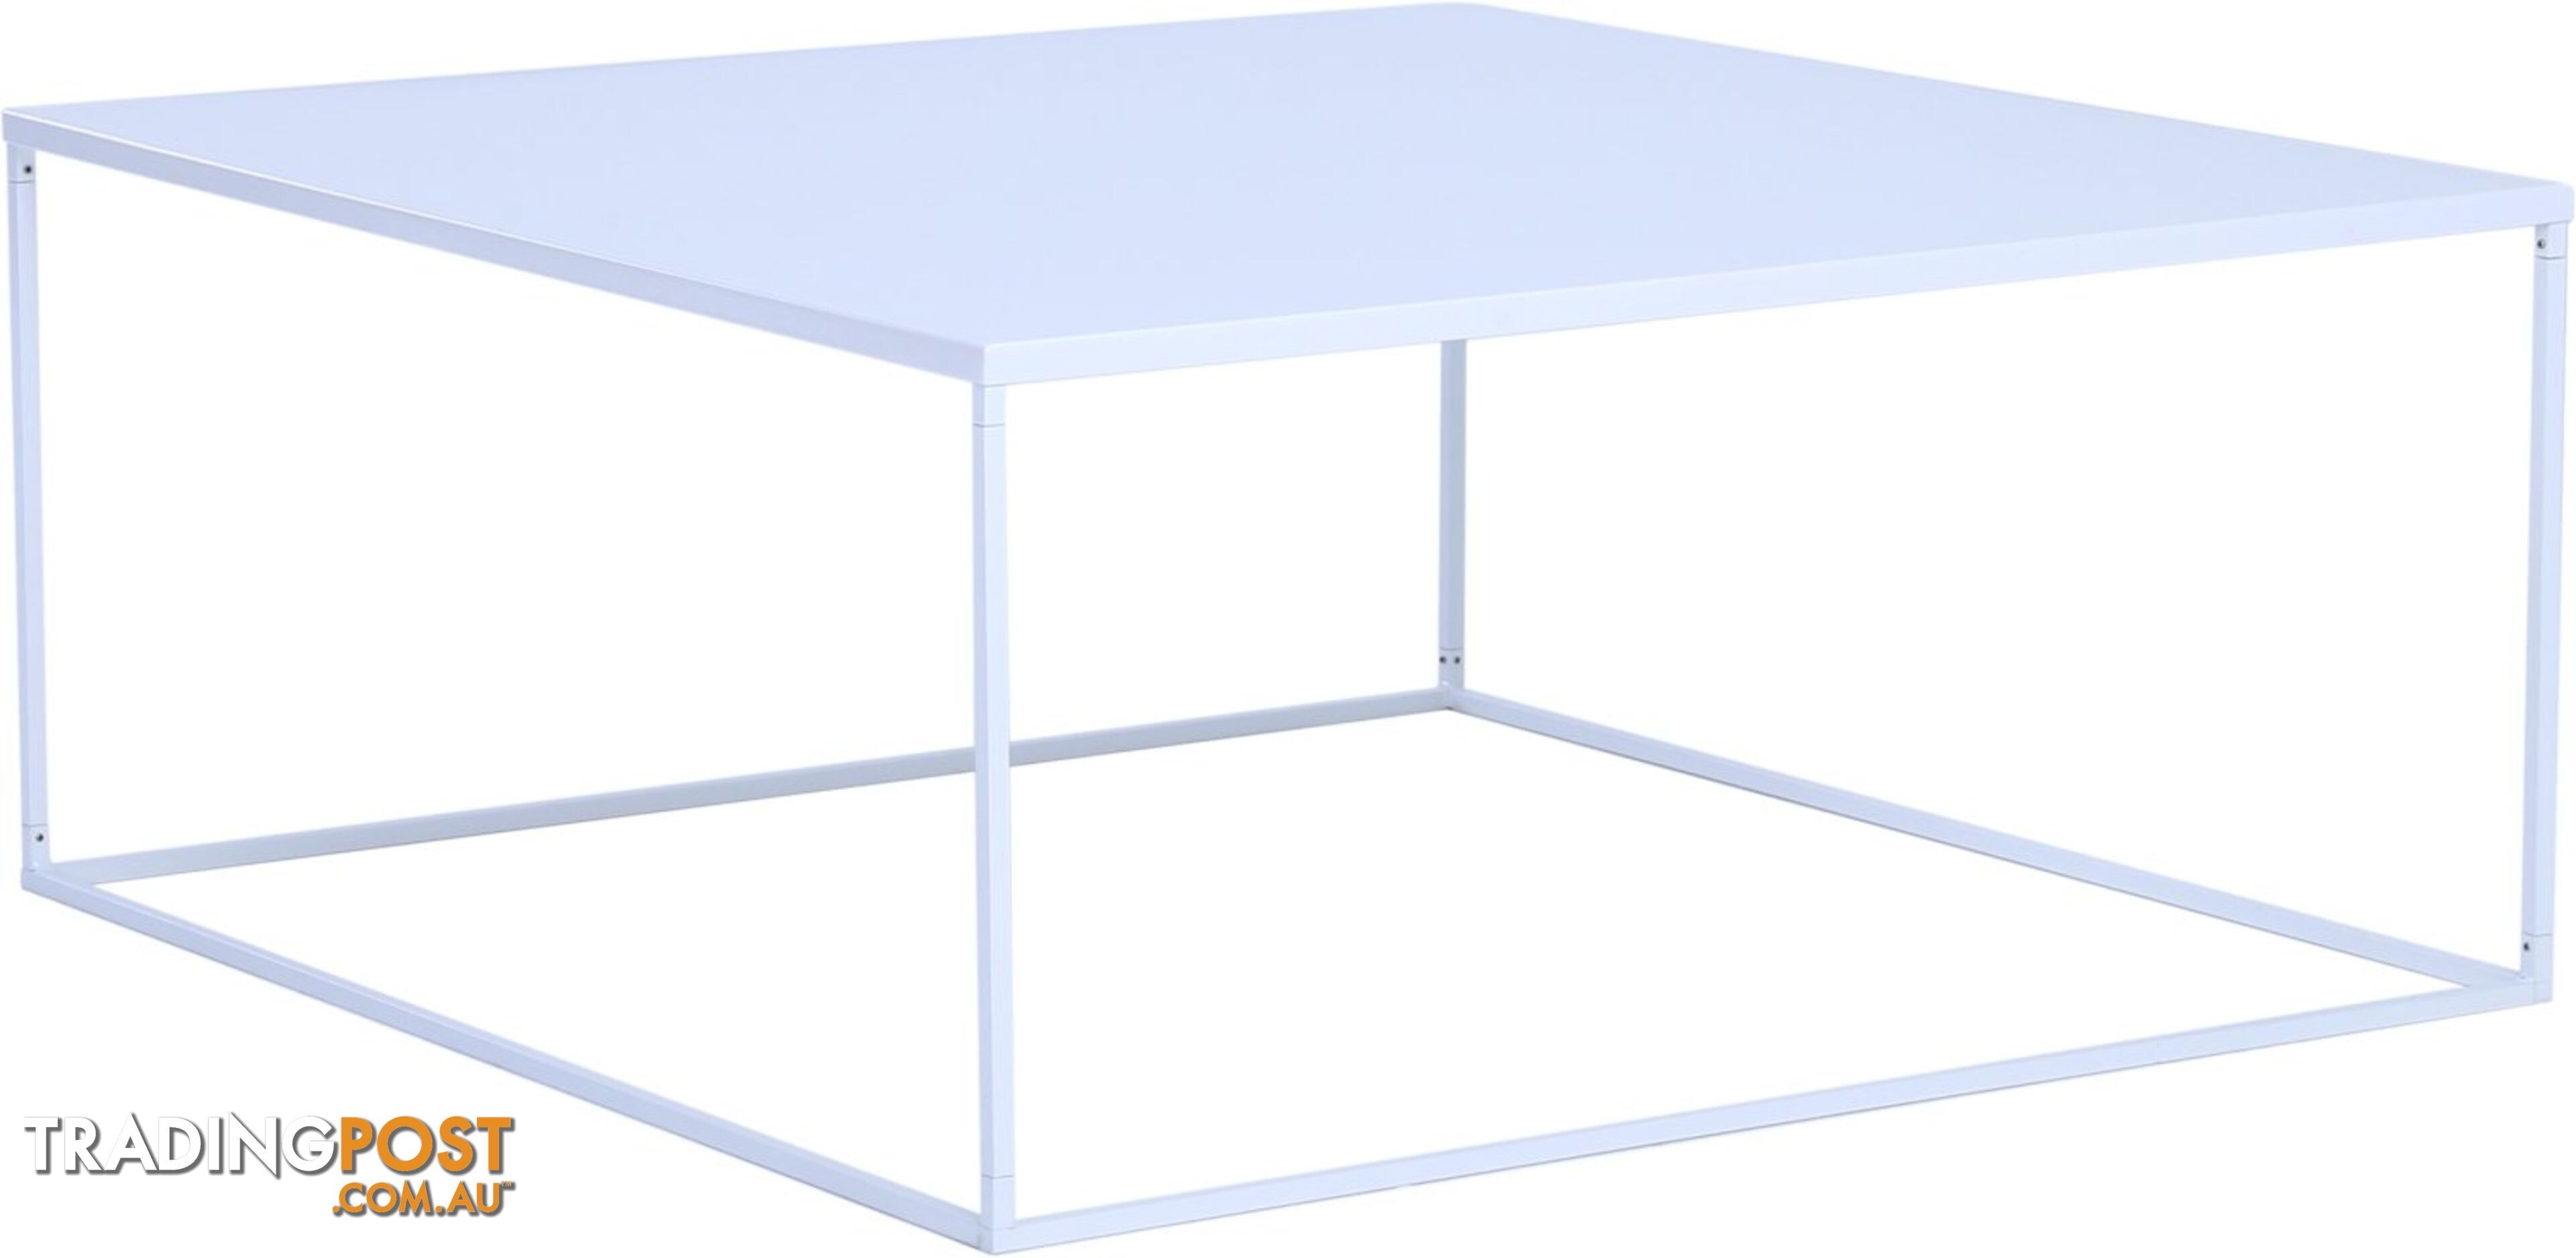 DARNELL Coffee Table 80cm - White - 132017 - 9334719004990